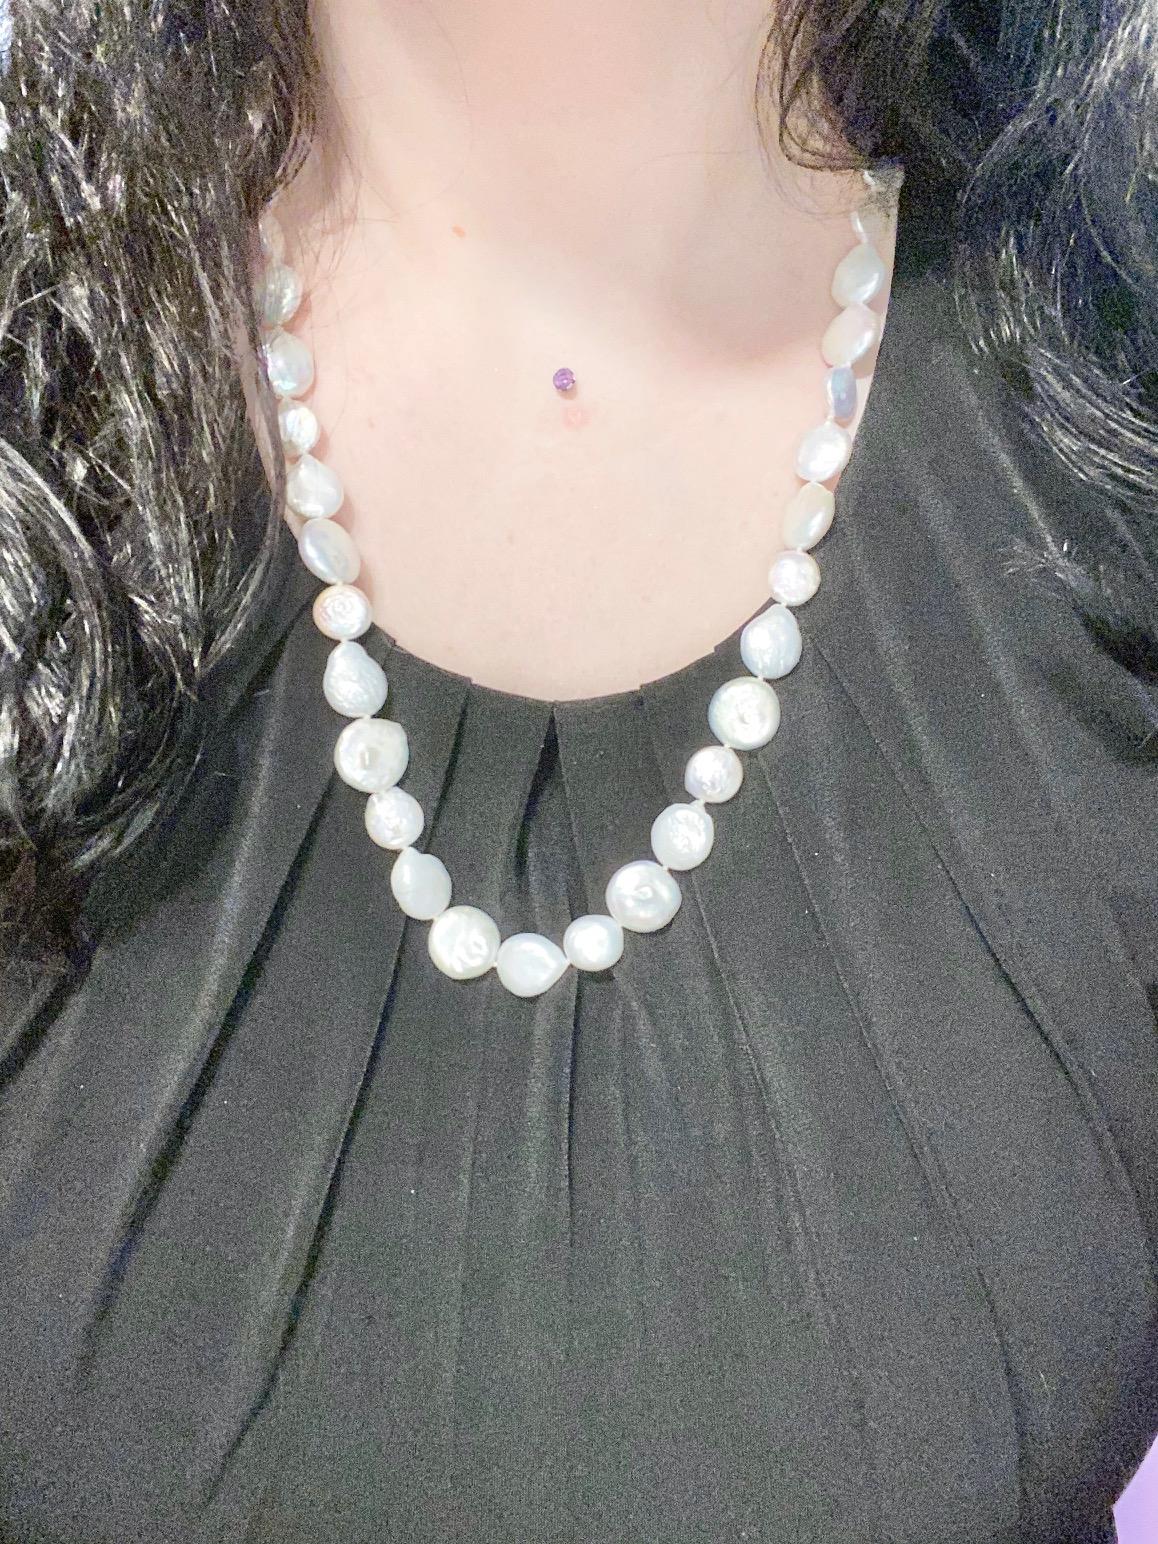 This genuine cultured pearl necklace will make you feel super confident!! It has coin pearls that have a high luster that brings rainbow hues out around them! The pearls on this necklace are an eye catching off white that sits beautifully with any